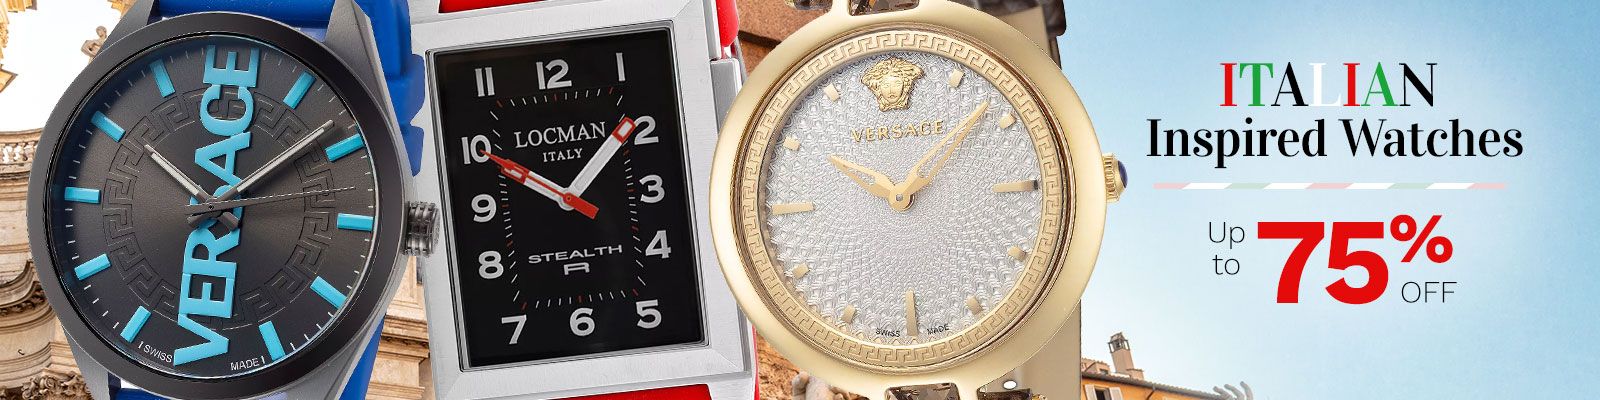 Italian Inspired Watches  Up to 75% Off  - 696-864, 929-175, 929-168